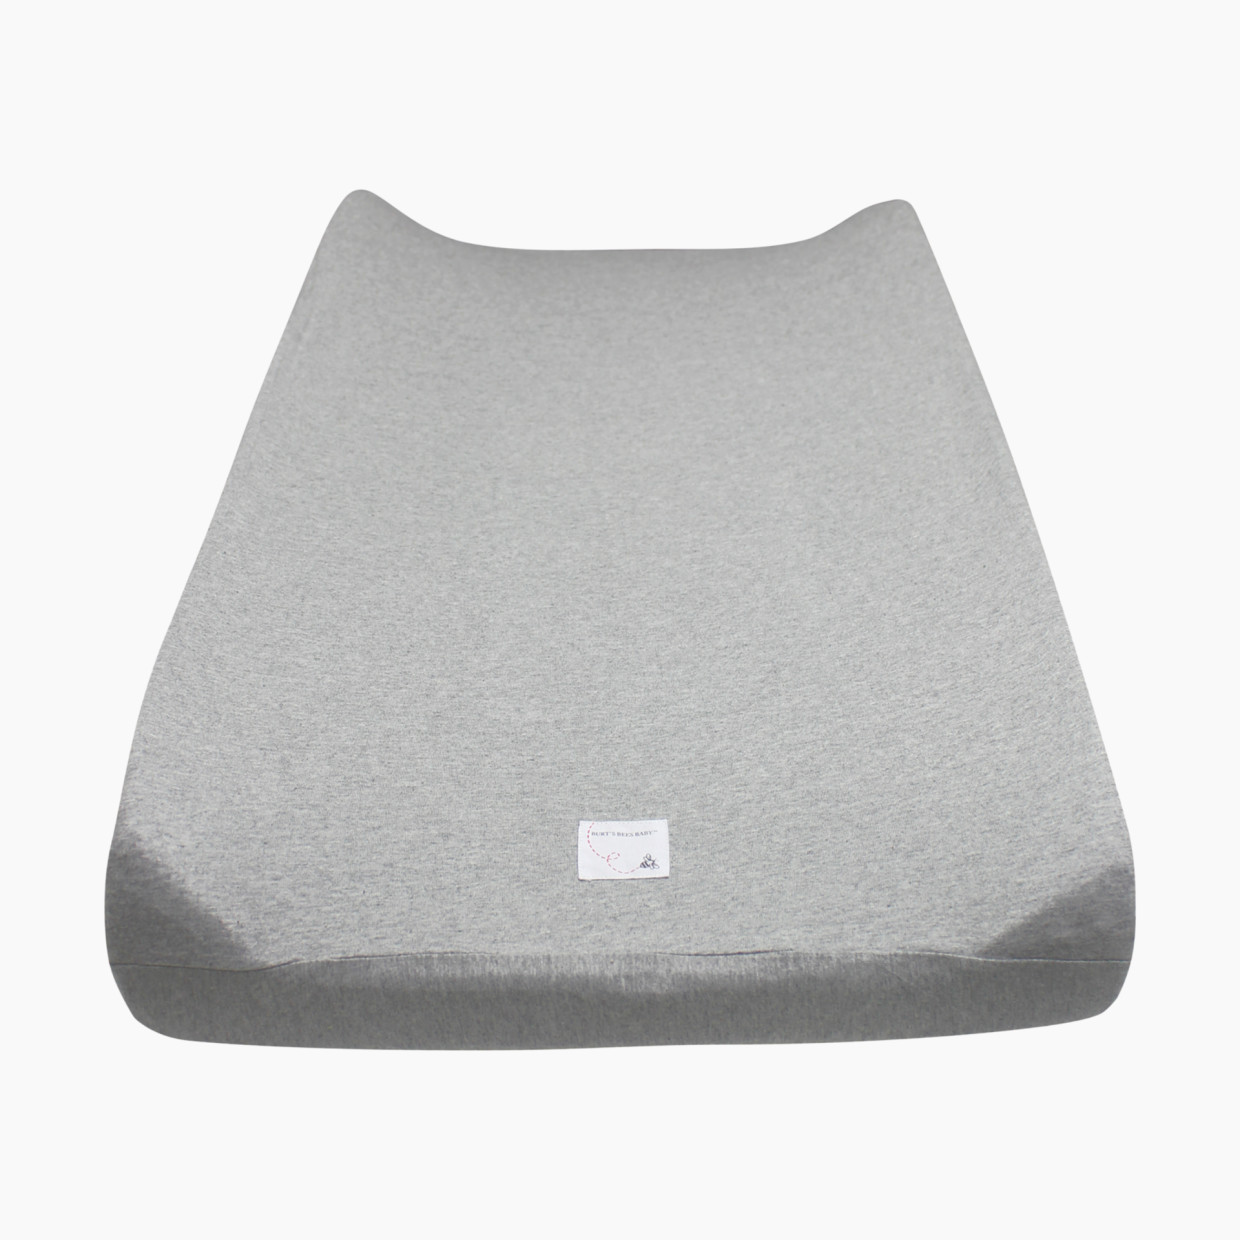 Burt's Bees Baby Organic Cotton Jersey Changing Pad Cover - Heather Grey.